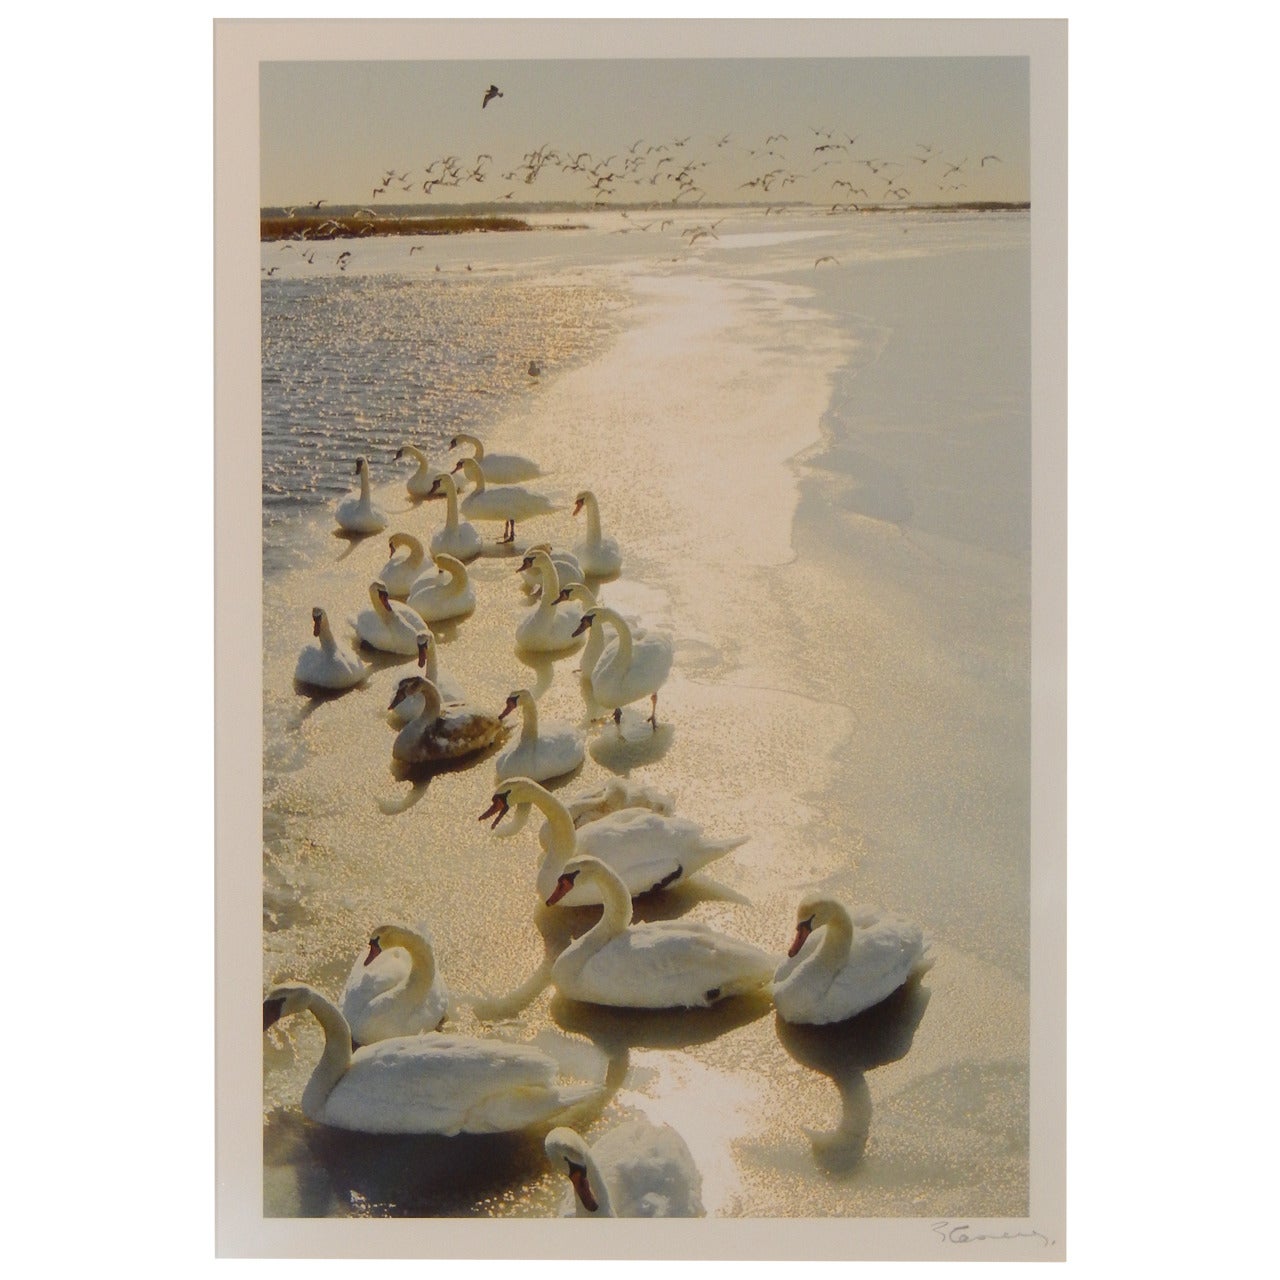 "The Swans of Squassex, " by Photographer Patrice Casanova, Long Island, NY For Sale